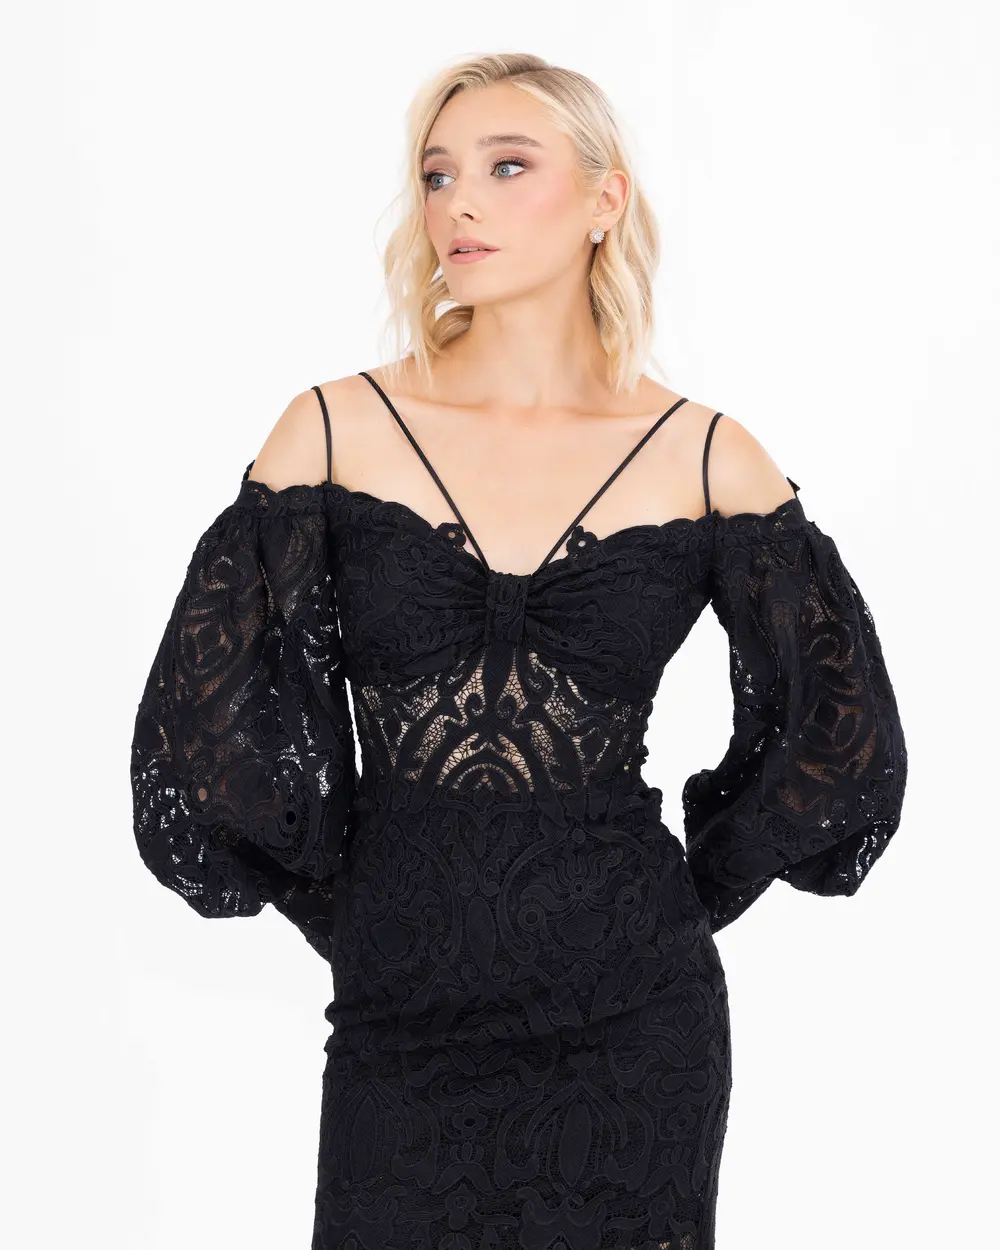 Narrow Formal Evening Dress With Lace Bust Cups